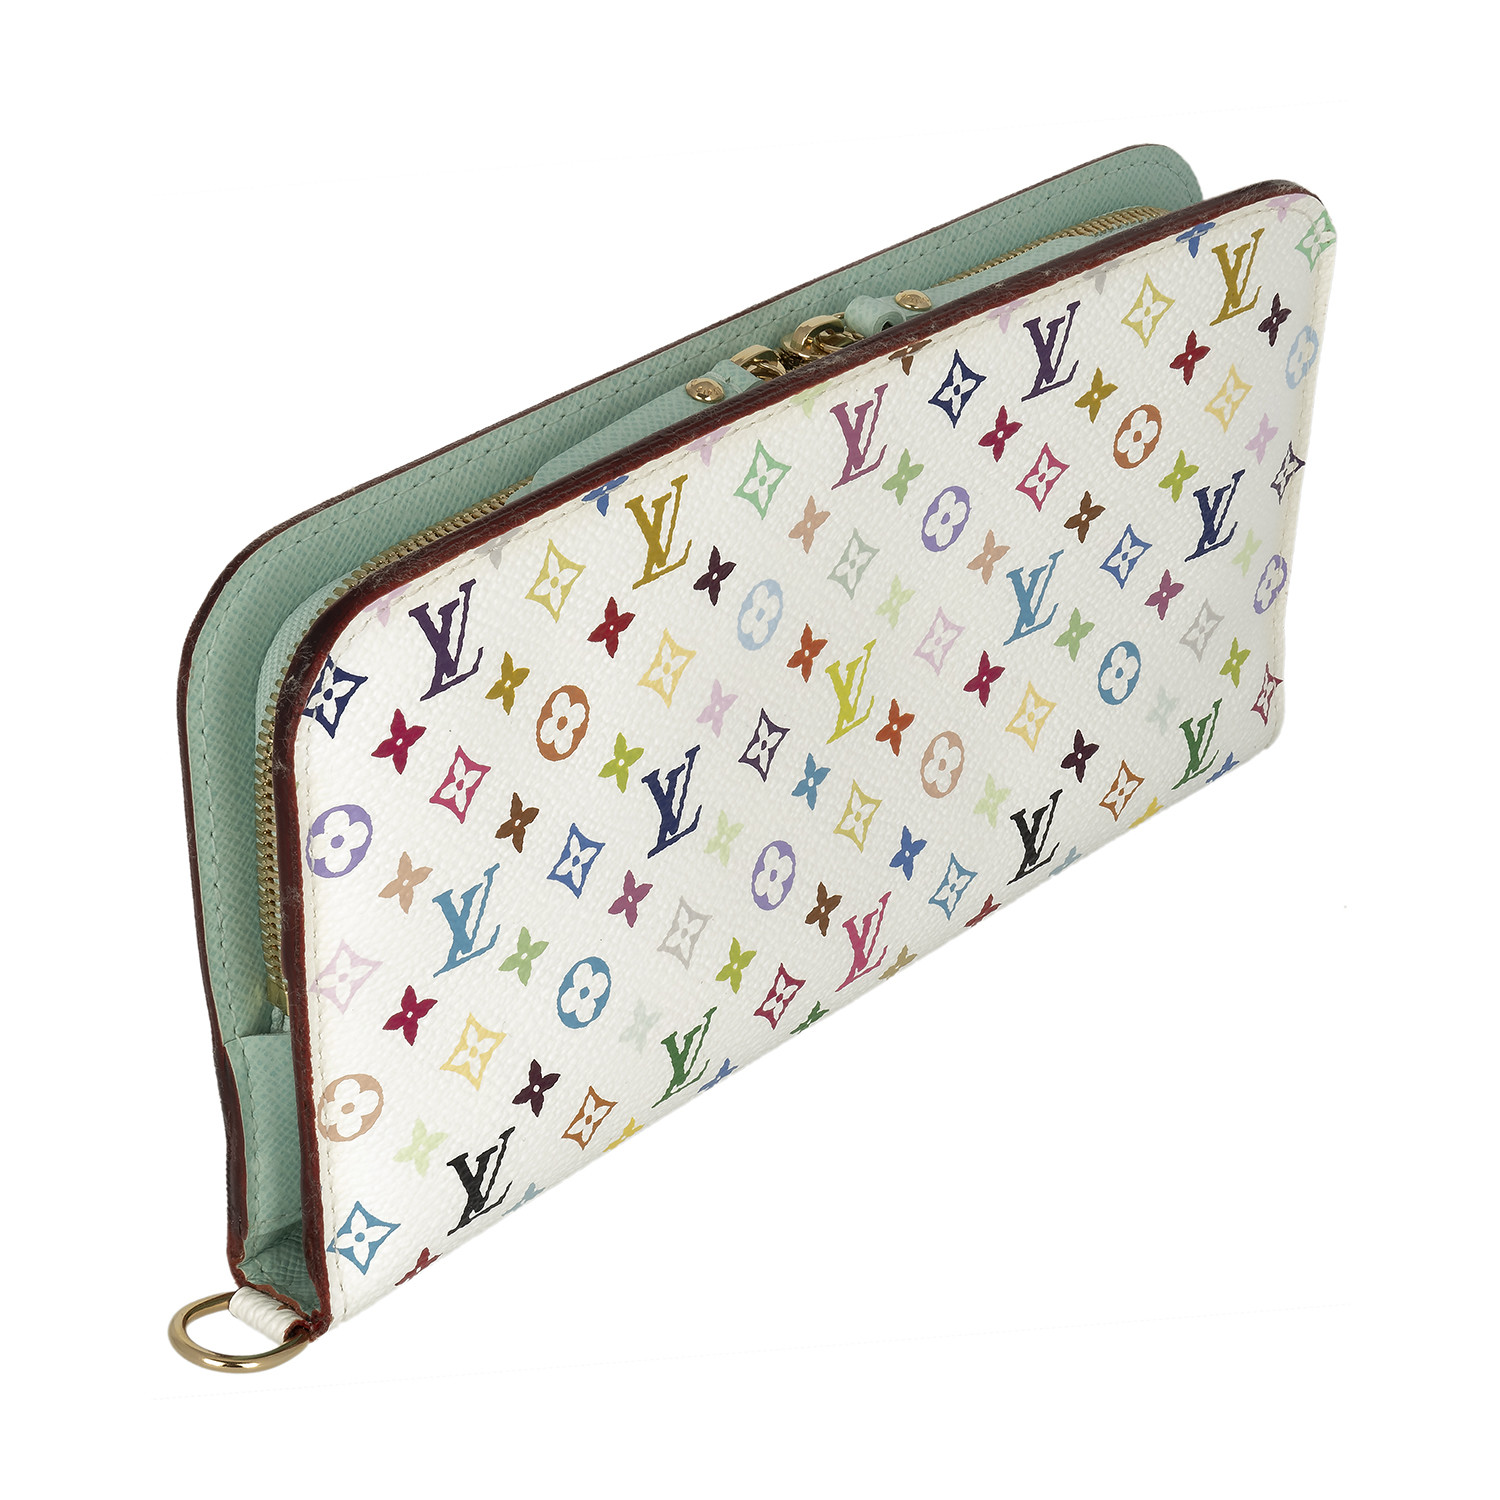 LOUIS VUITTON Monogram Insolite Wallet with Wristlet rt. $825 at